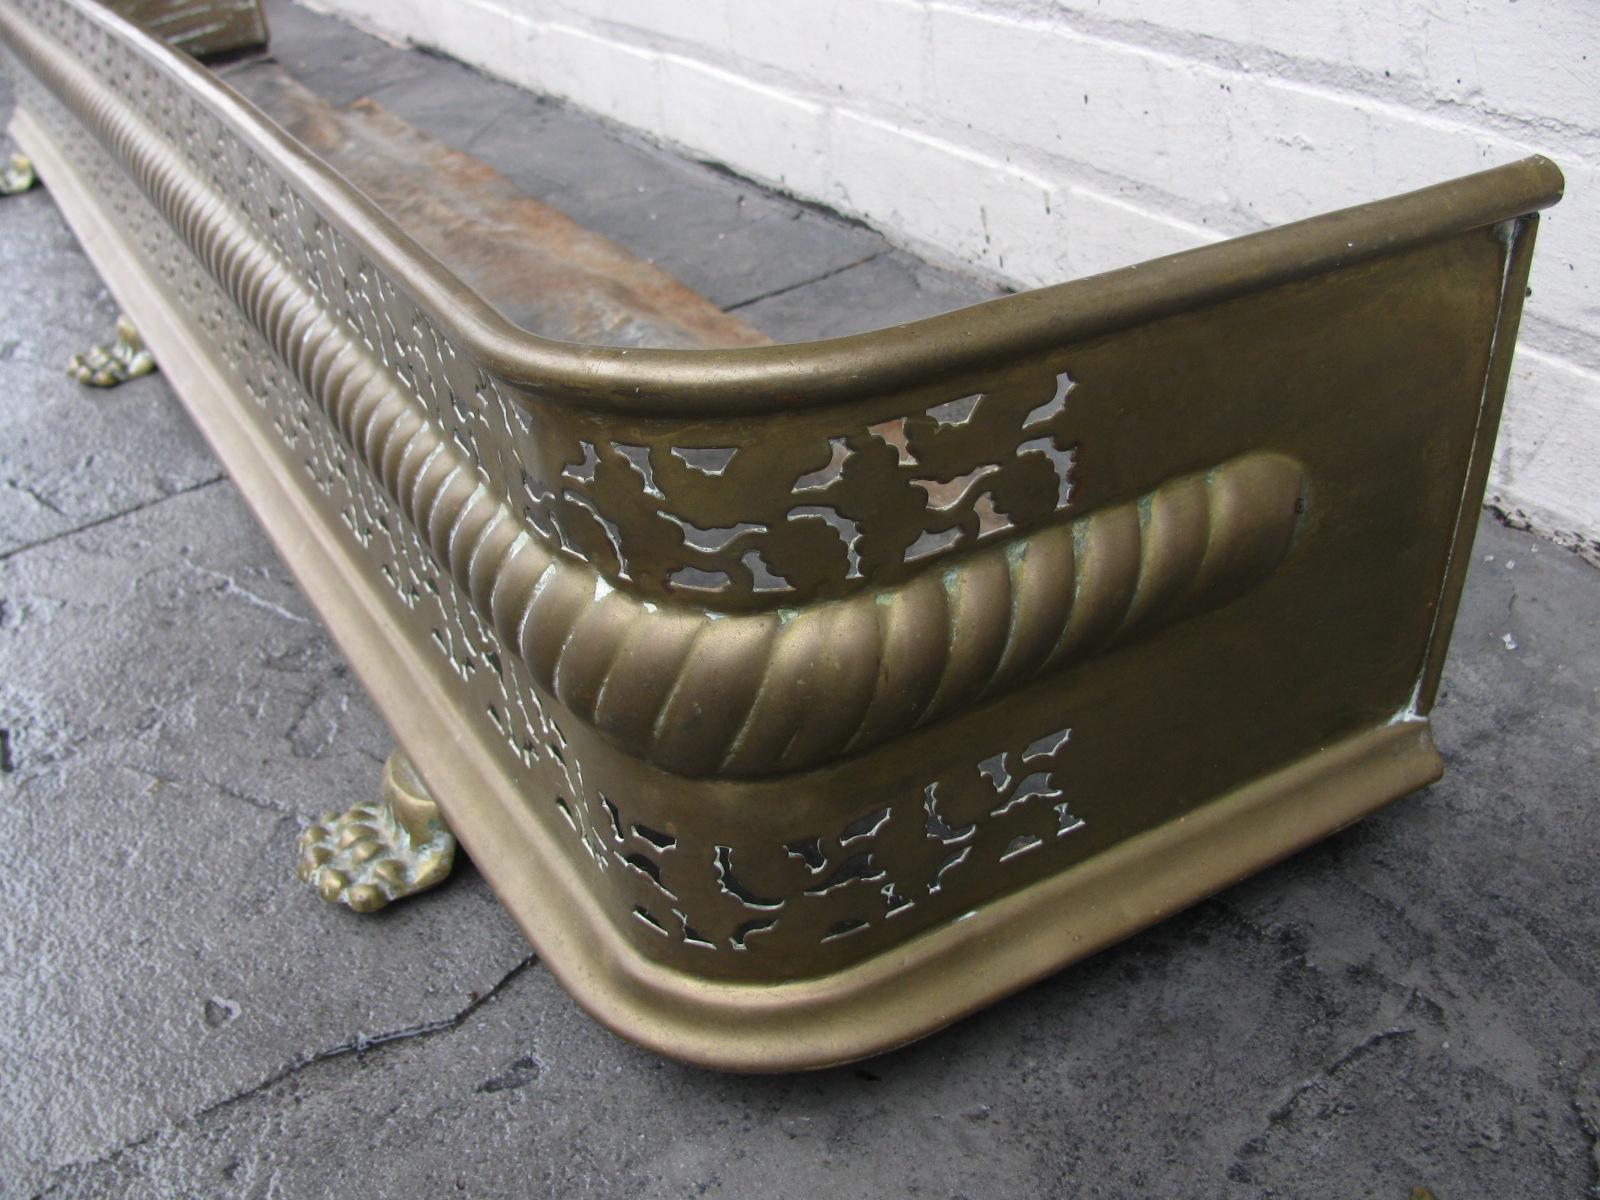 Fabulous pierced brass antique fireplace fender from England. Lions paw feet and exceptional piercing with rope banding. Mid-19th century with patina. Can be polished up if need be for a fee.